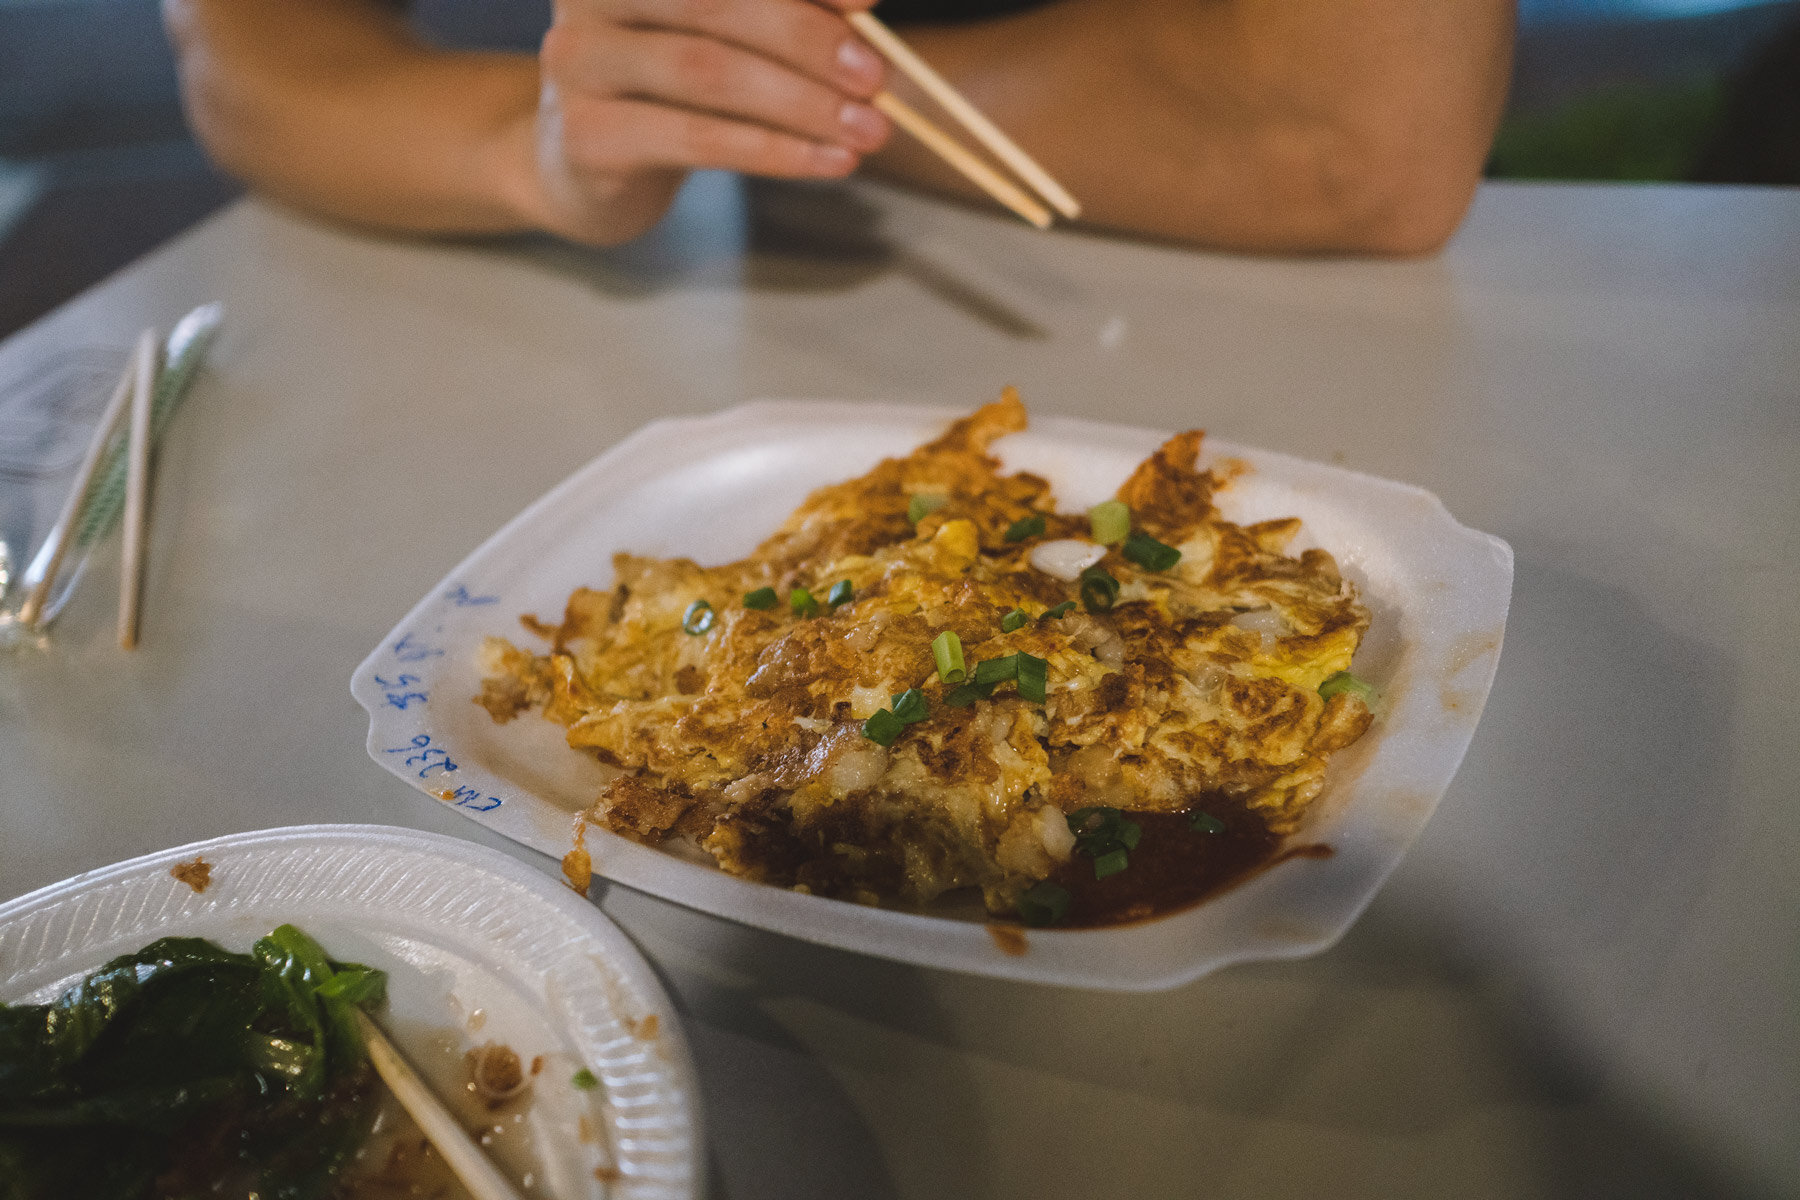 Hawker Food is good and cheap, but you will also eat from plastic dishes and with disposable chopsticks.